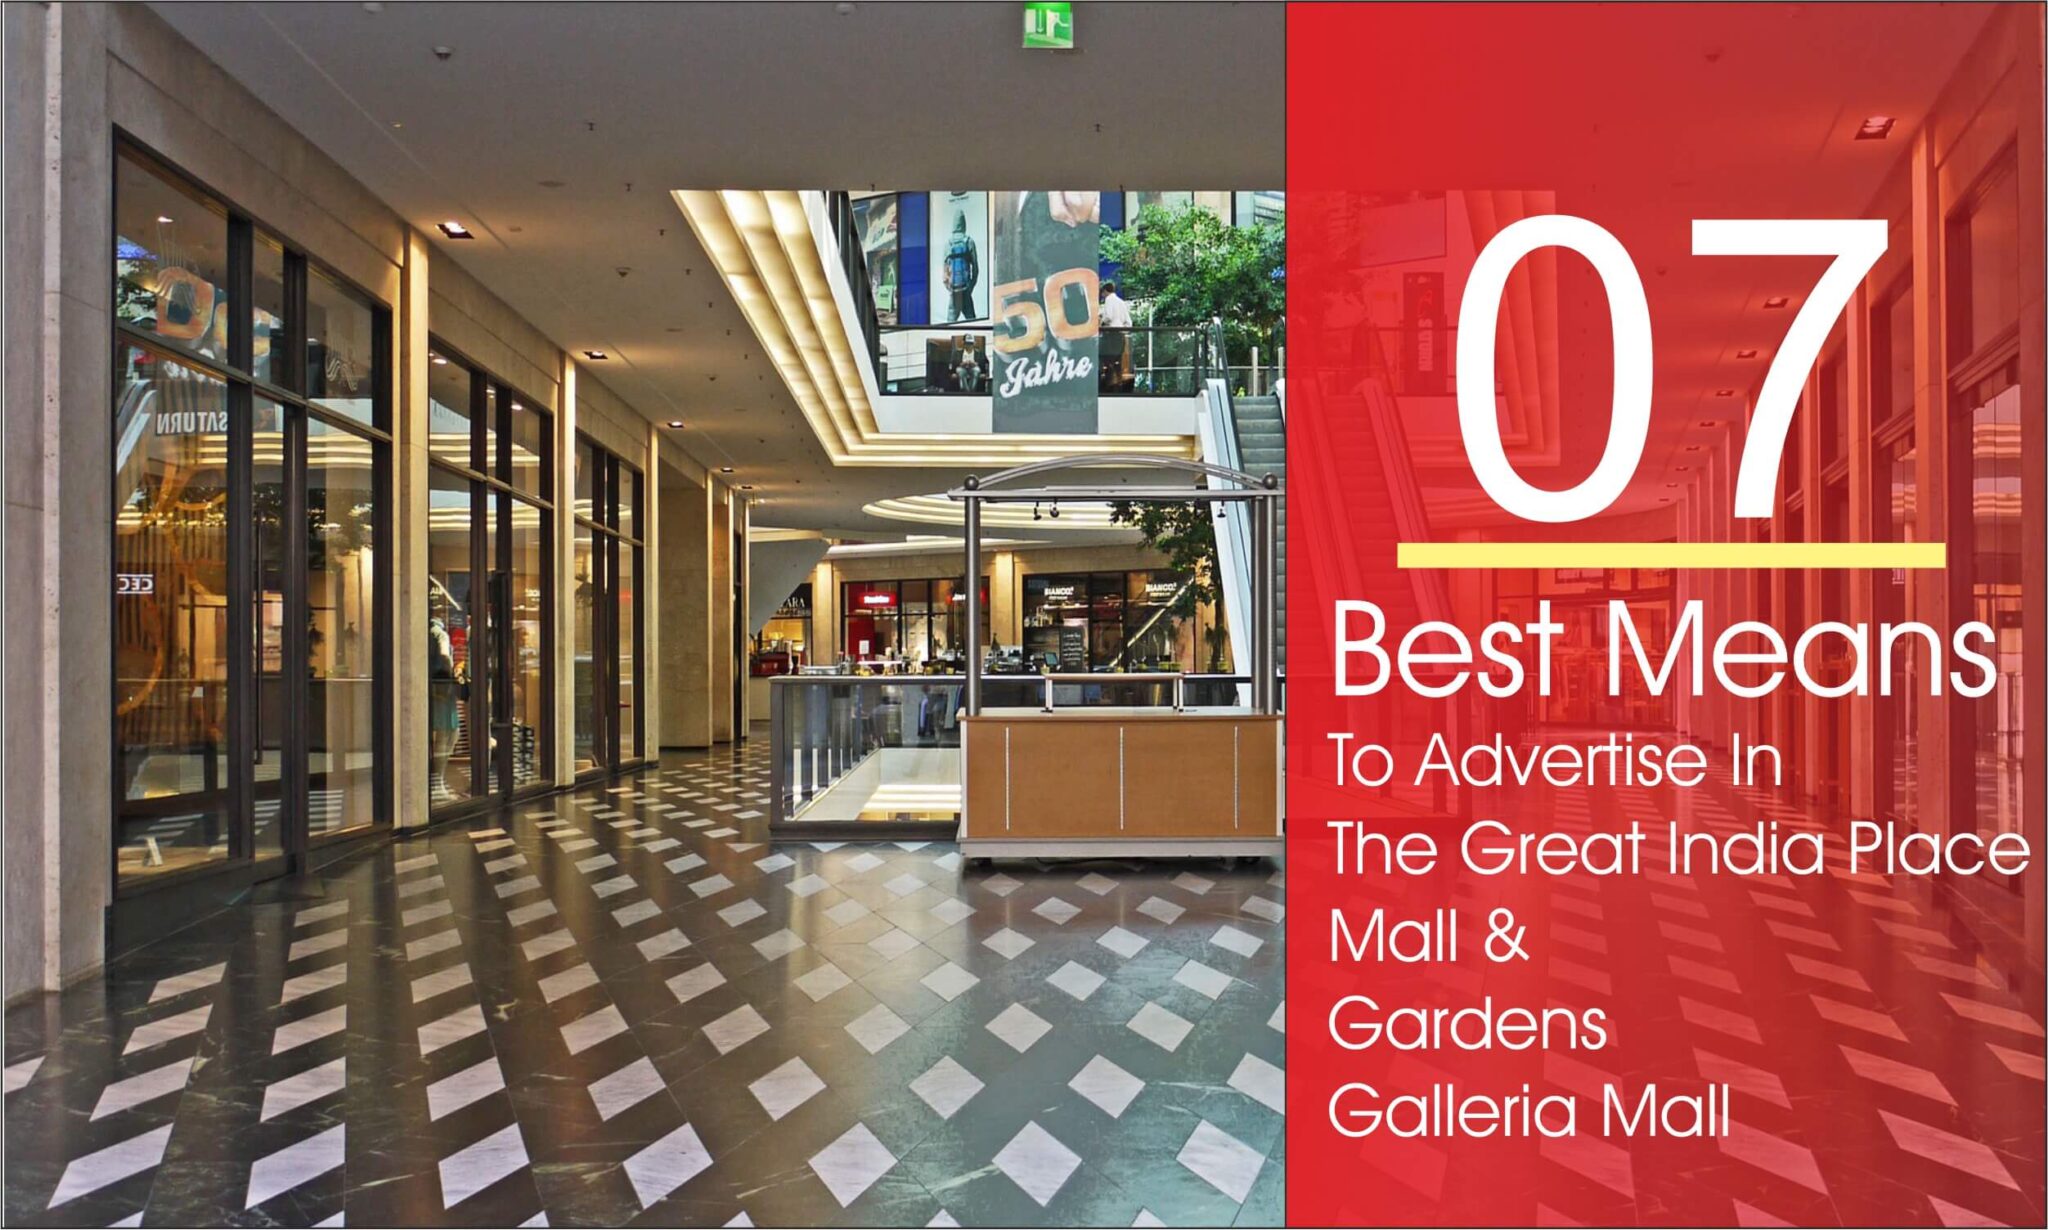 7 Best Means to Start your Brand Advertising in The Great India Place Mall (GIP) and Gardens Galleria